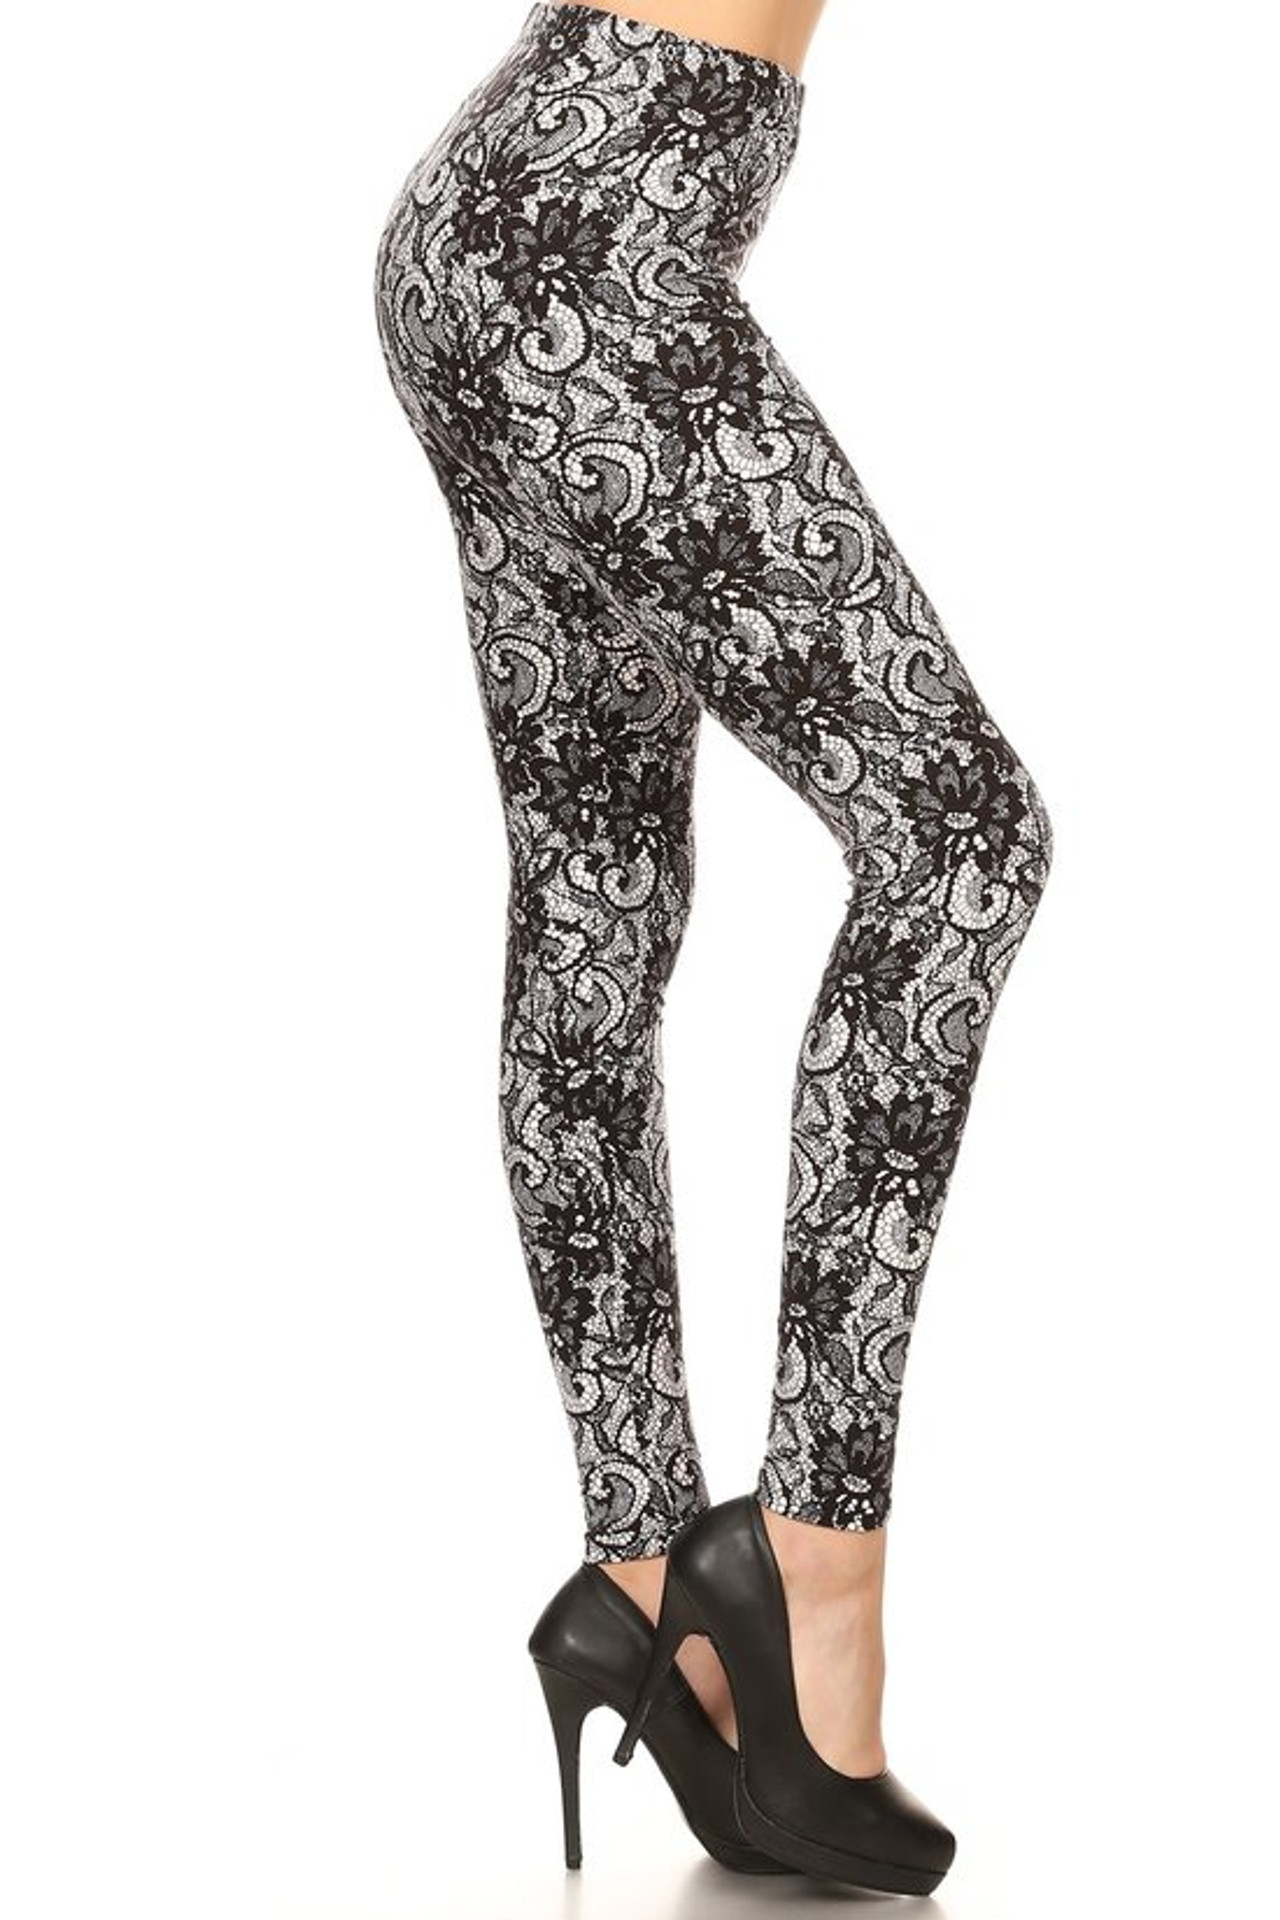 https://cdn11.bigcommerce.com/s-9th3f116/images/stencil/1280x2250/products/19956/100631/Sexy-Lace-Print-Leggings_1__47481__54871.1693430873.jpg?c=2